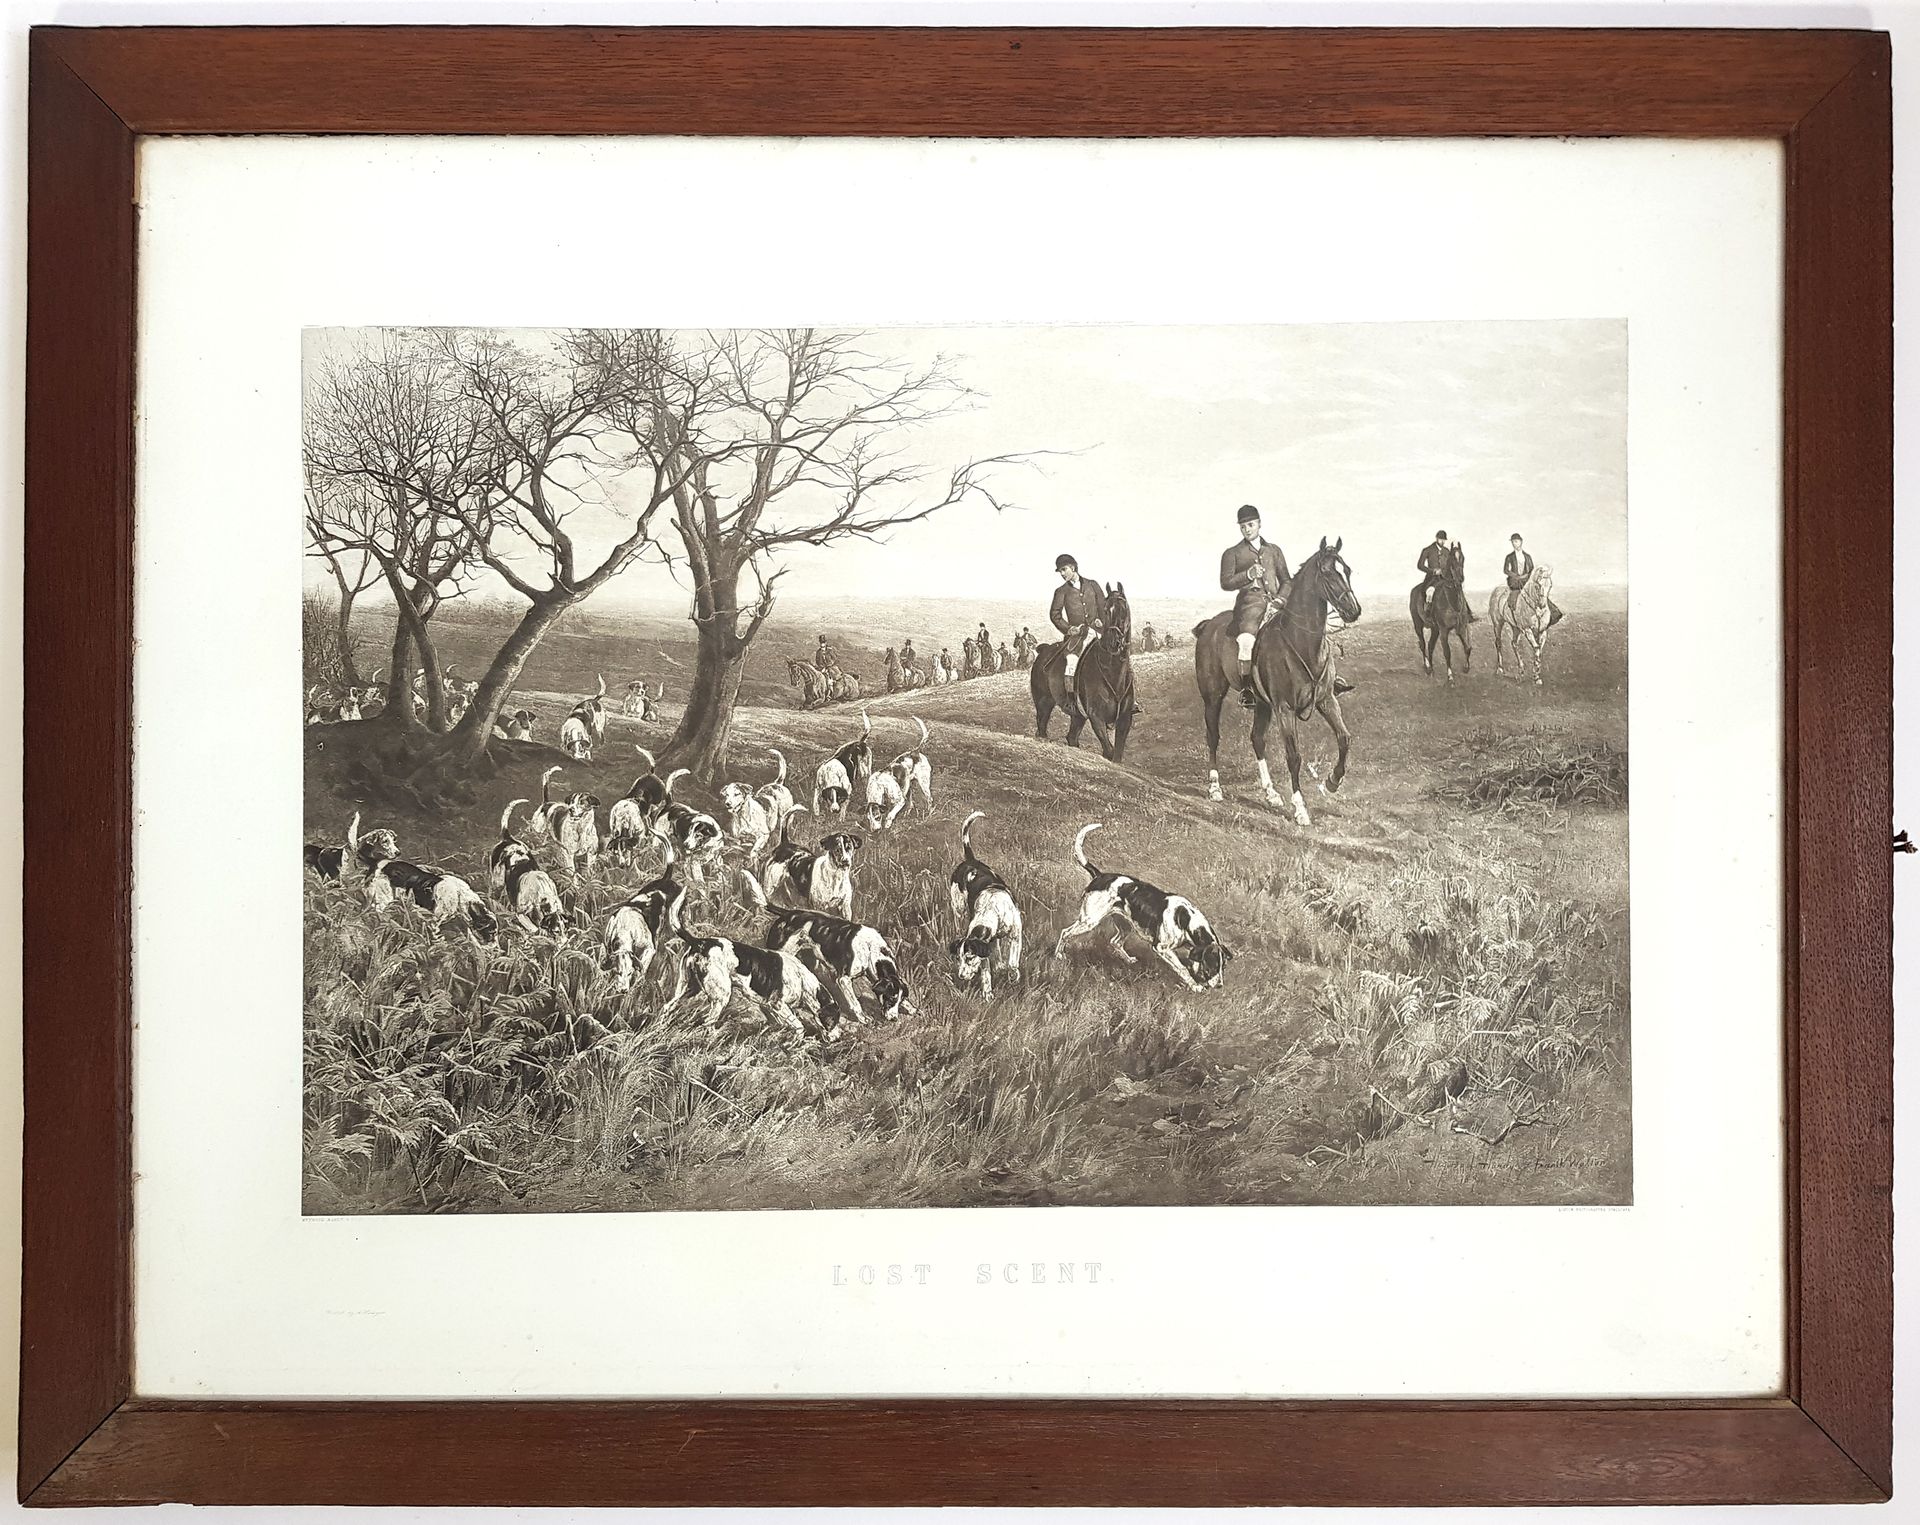 Null Chasse à courre

D'après Heywood HARDY (1842-1933)

Lost scent 

Photogravu&hellip;